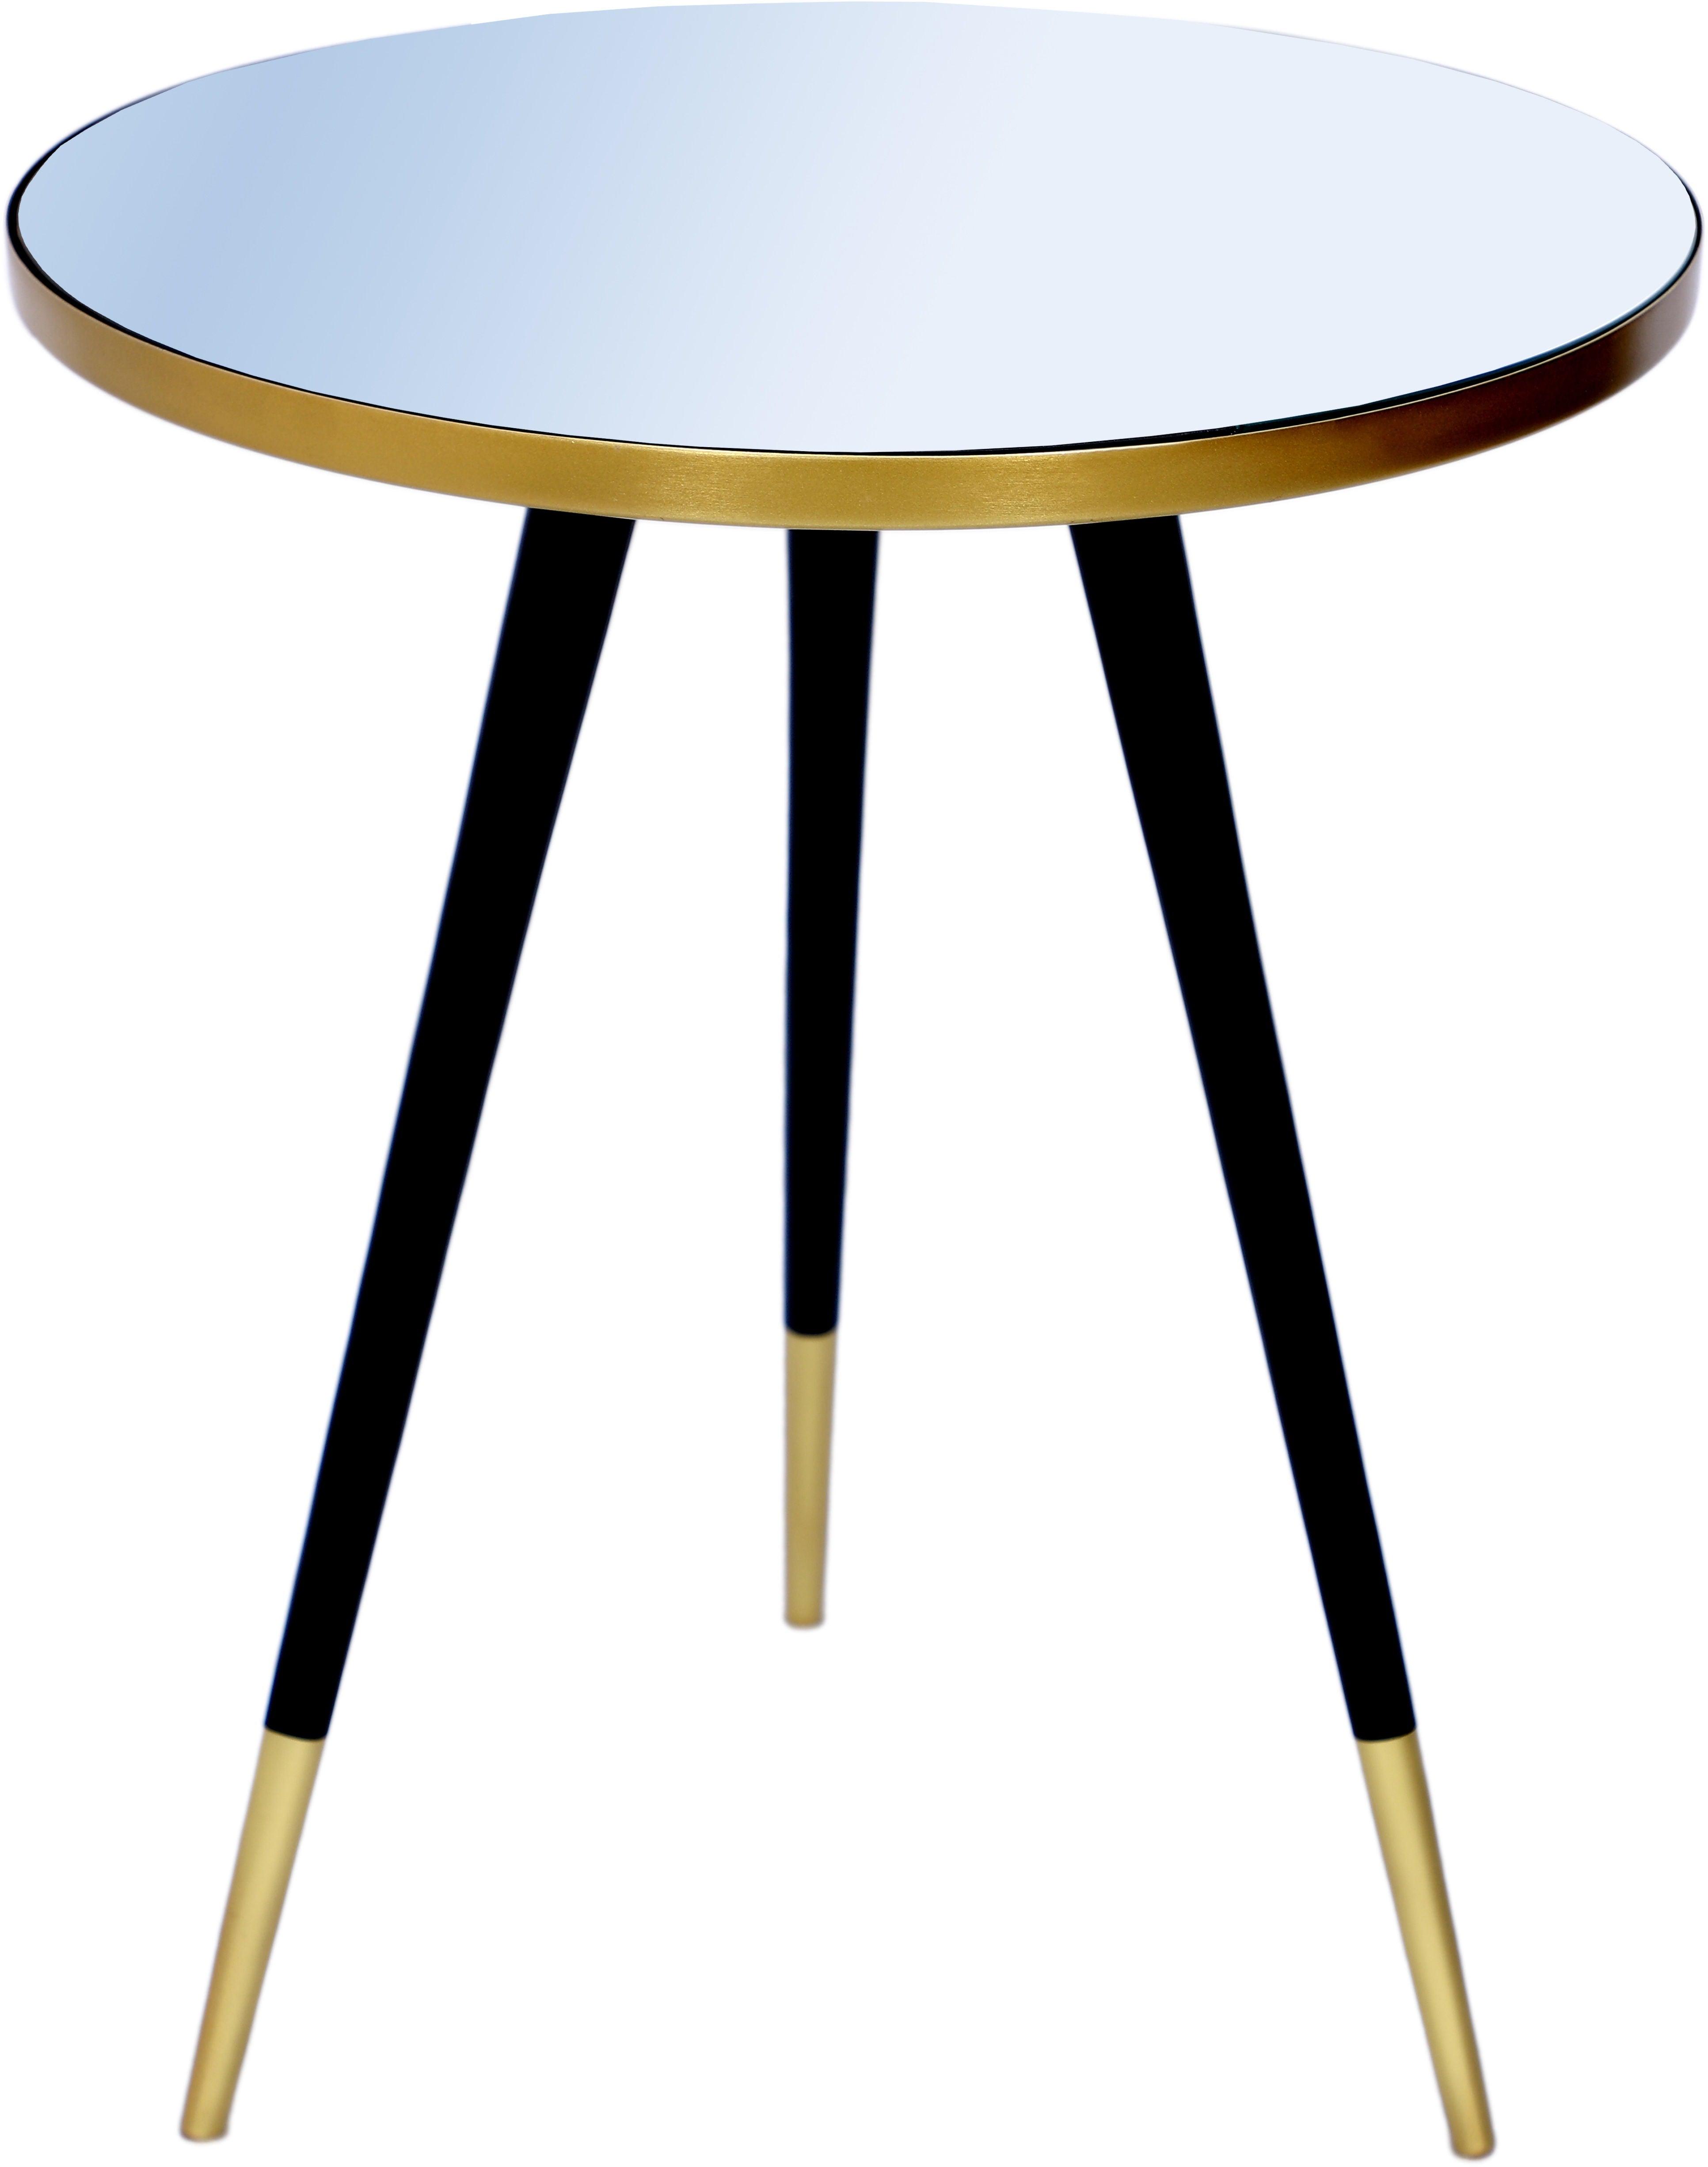 Meridian Furniture - Reflection - End Table - Gold - 5th Avenue Furniture